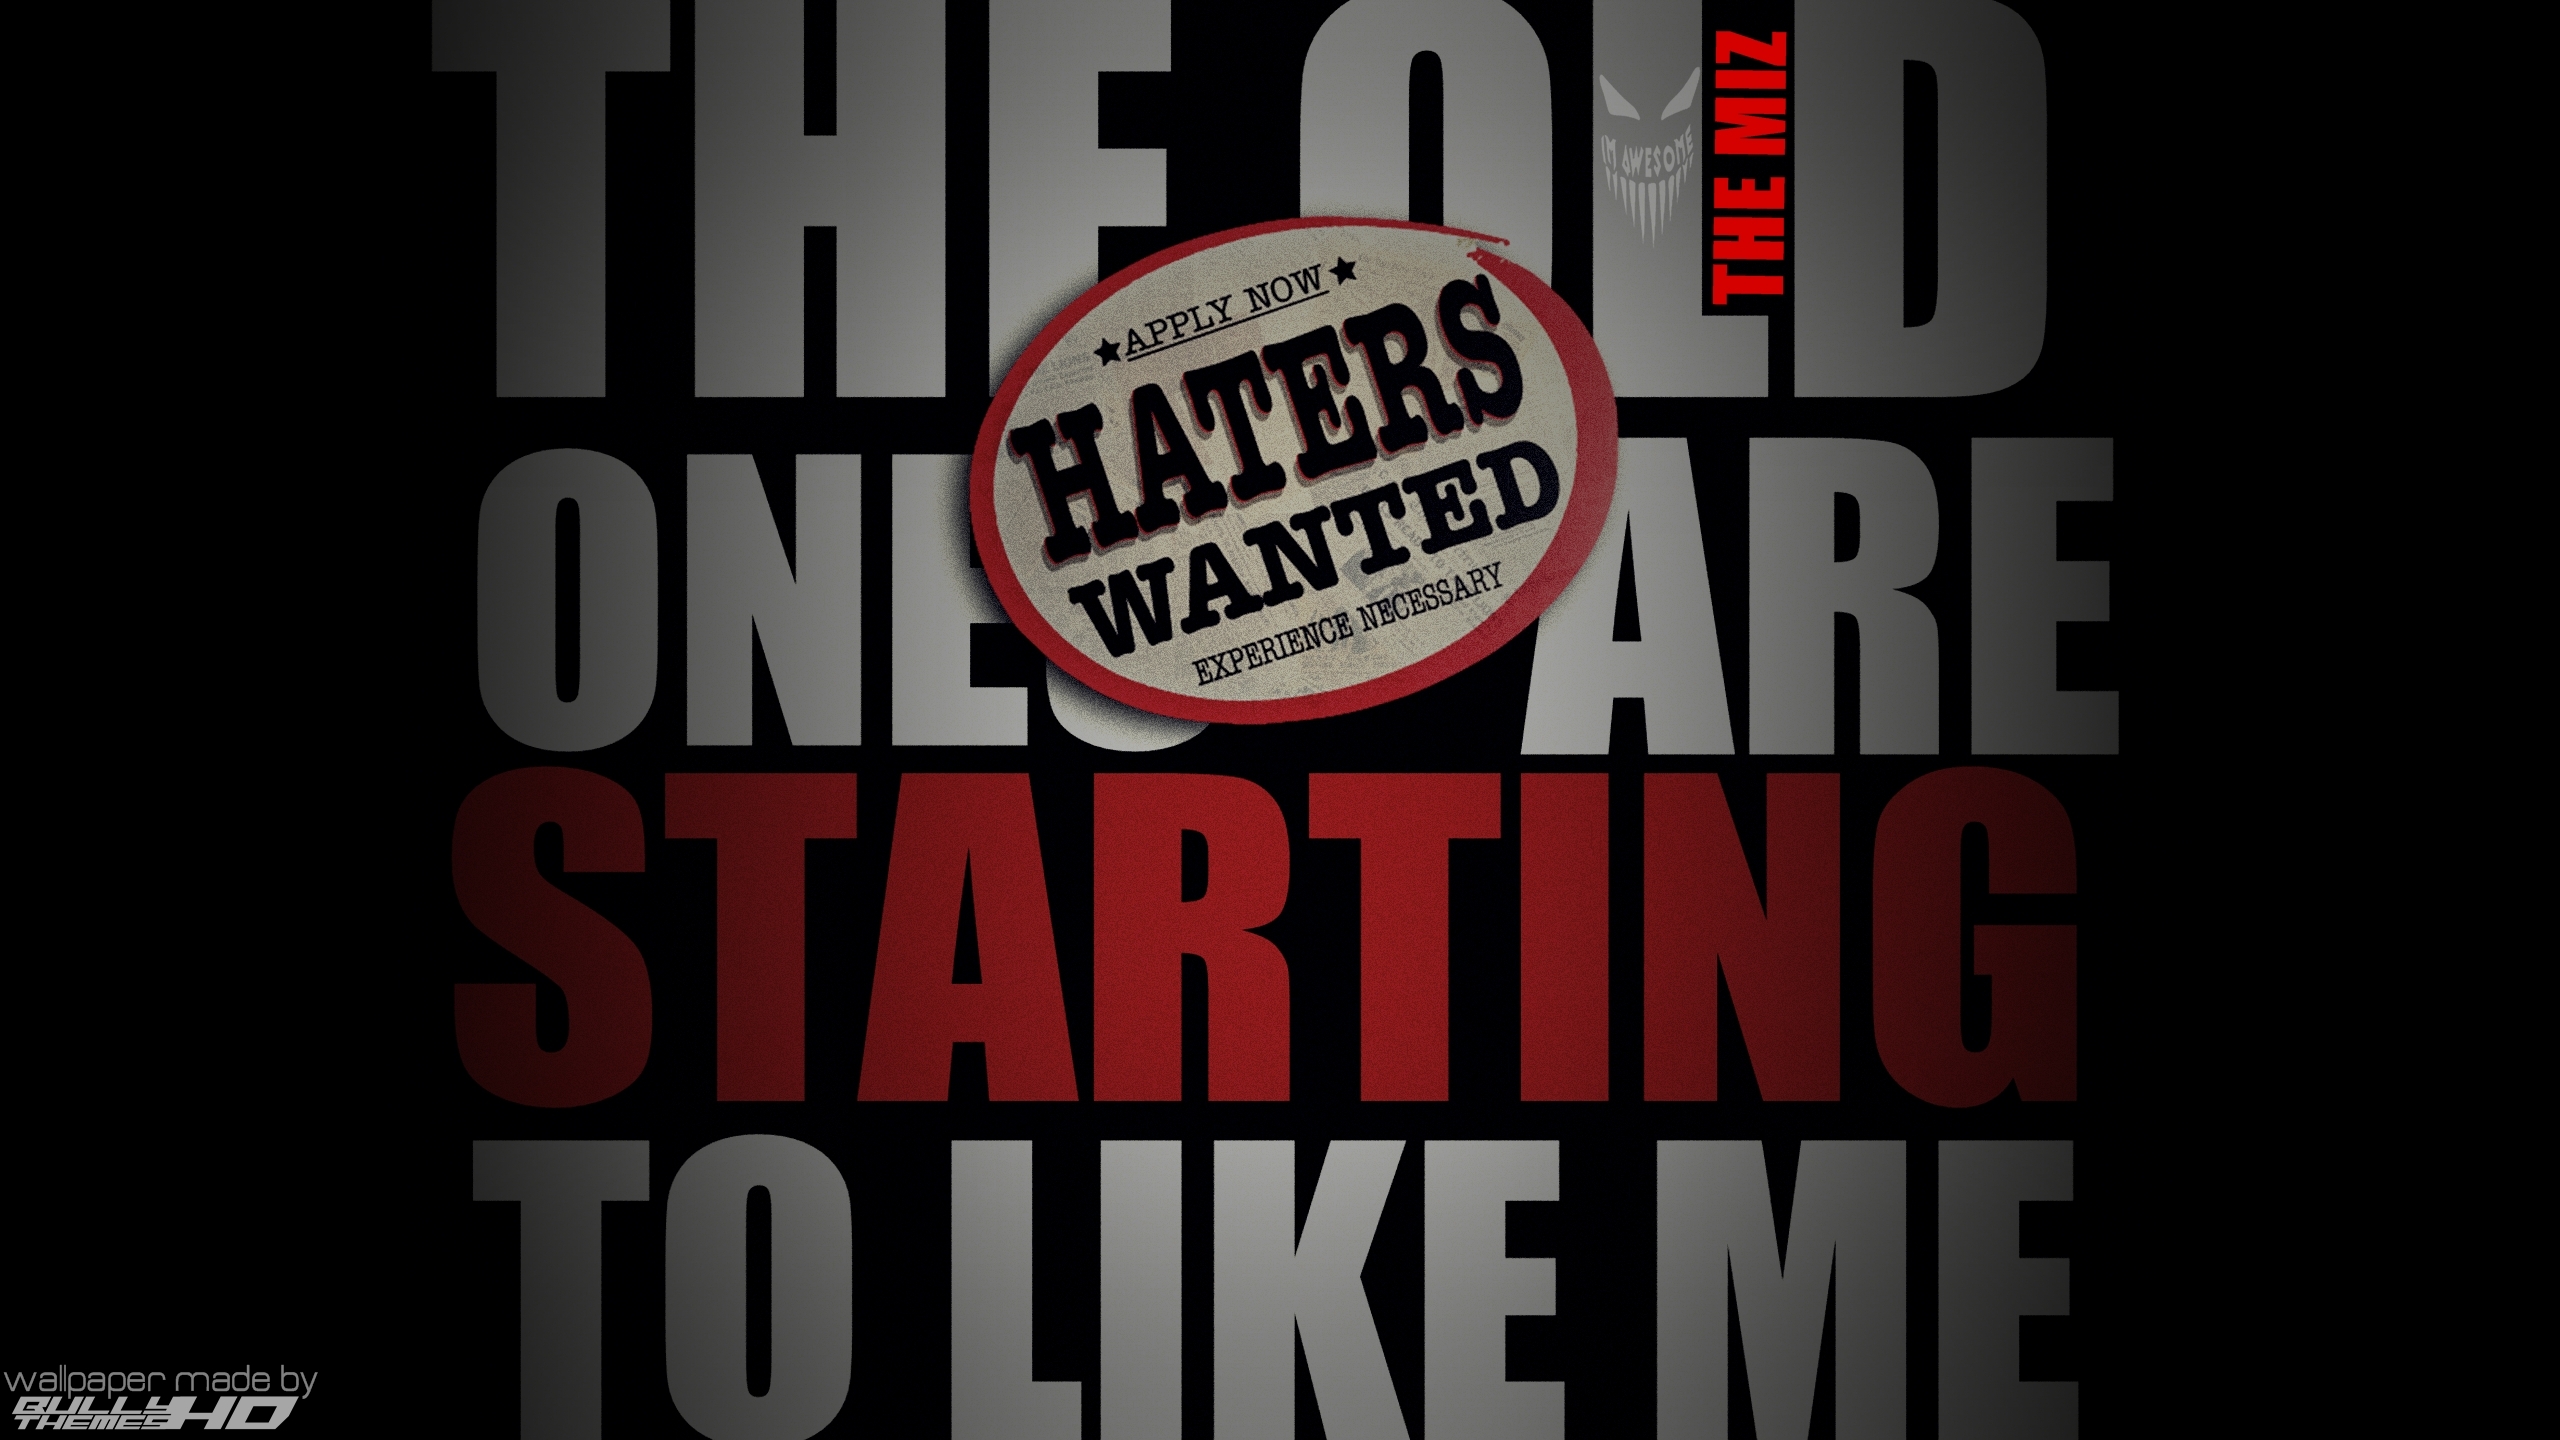 The Miz Haters Wanted Wallpaper By BullyHD